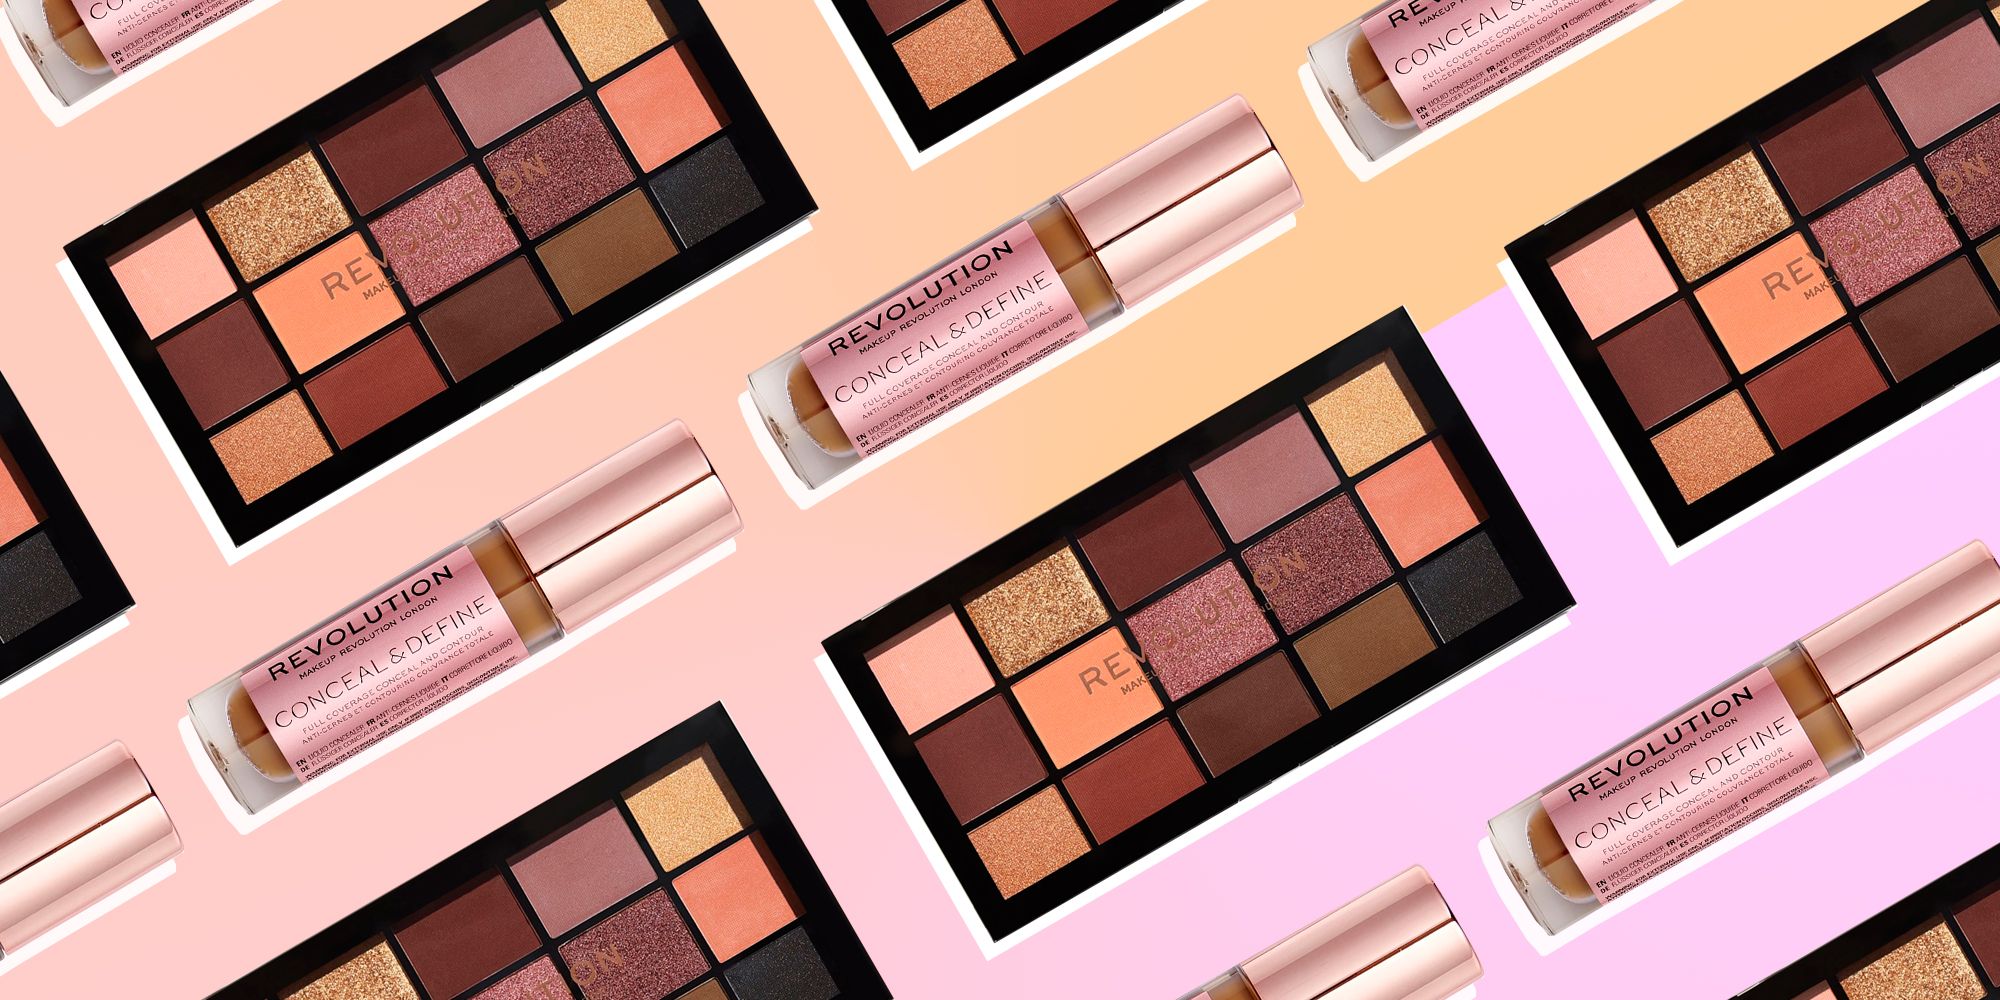 Voorlopige naam neus matchmaker Makeup Revolution: 7 under £10 products that could totally pass for high end